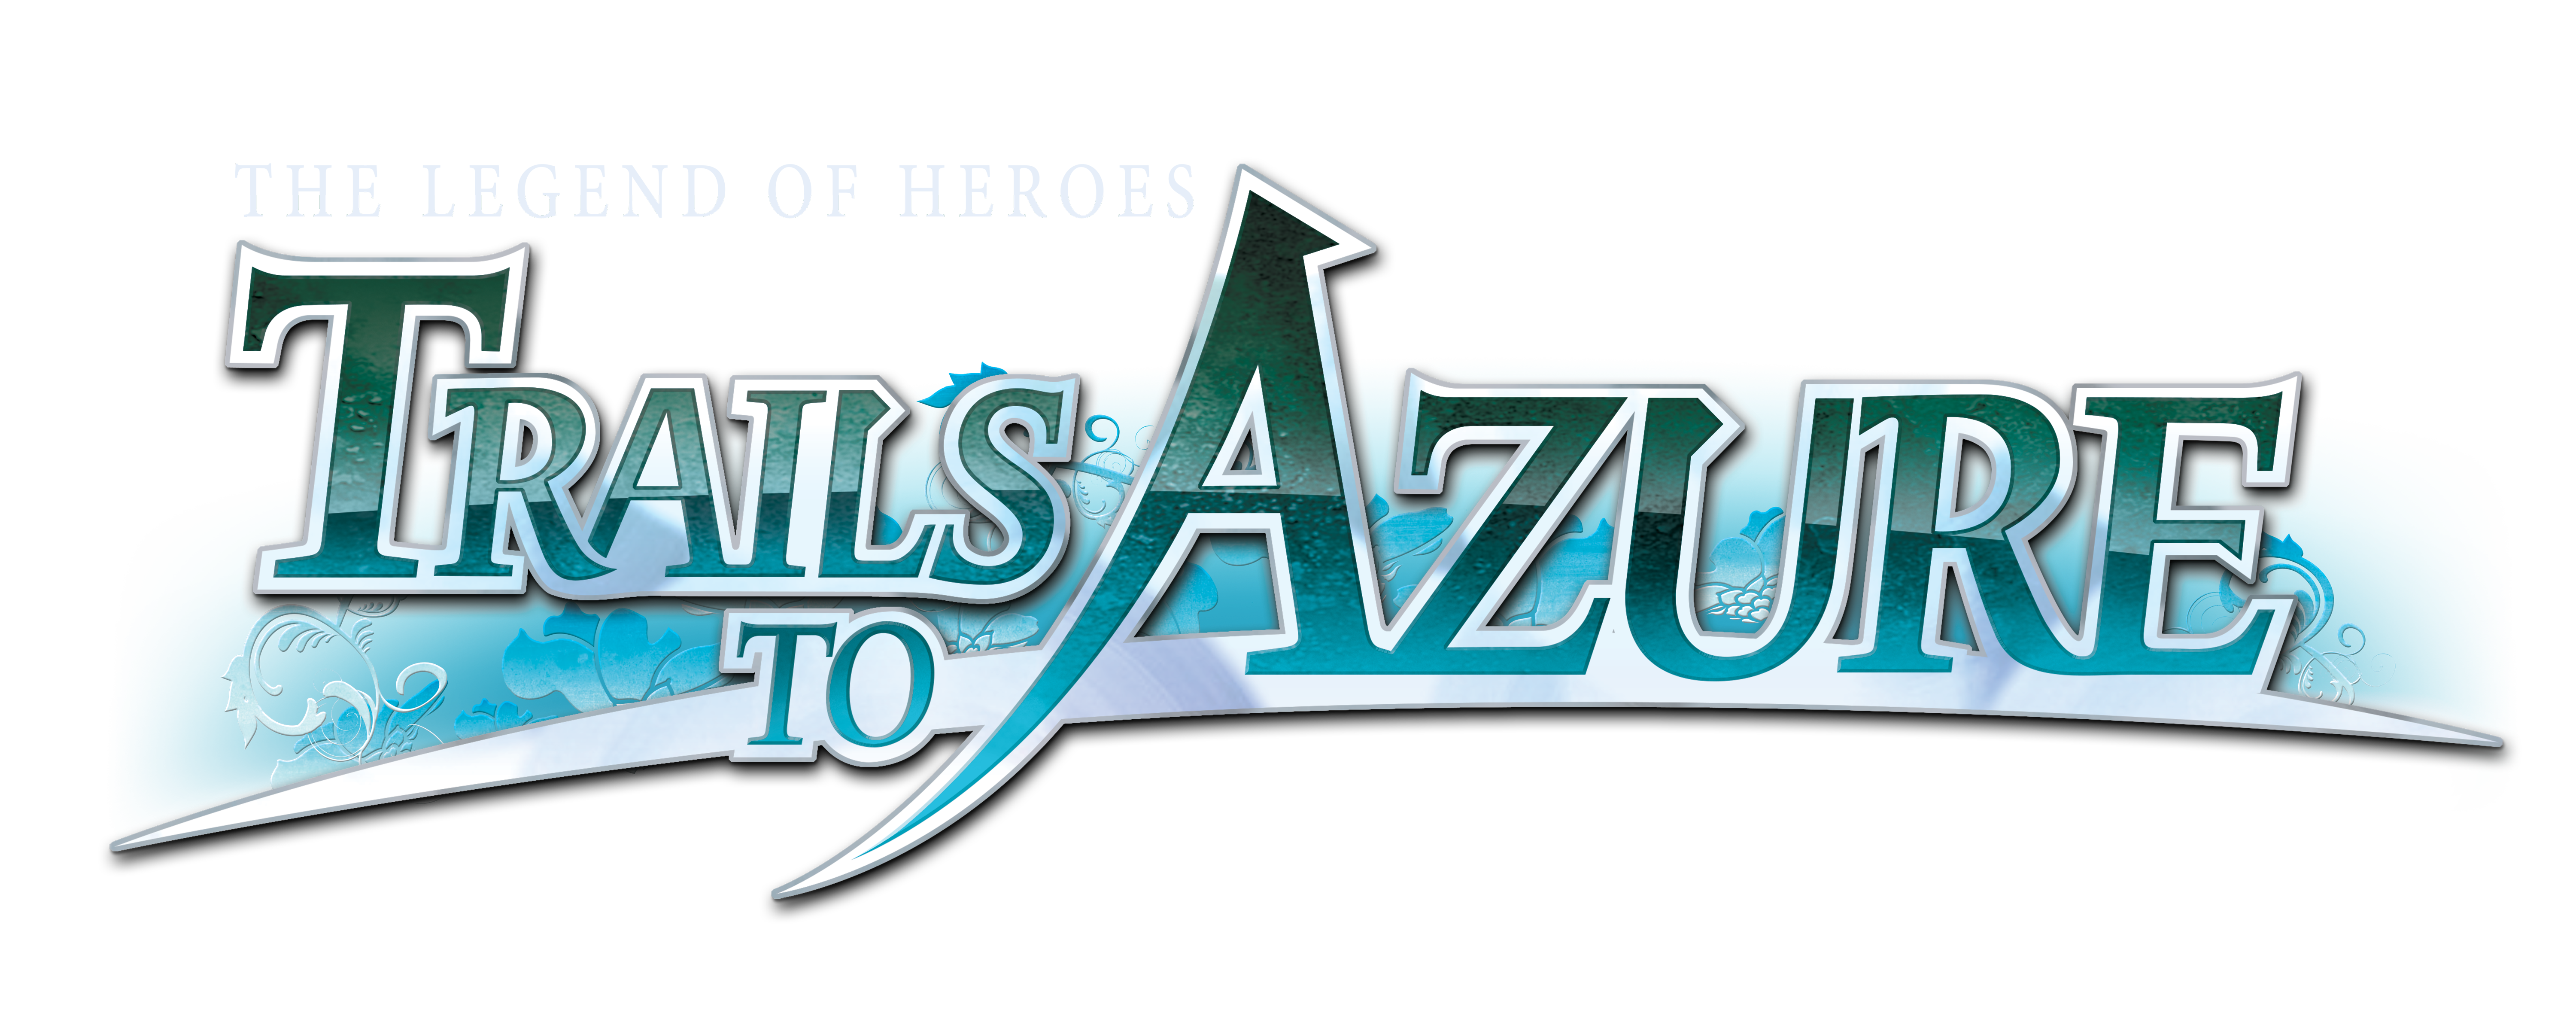 The Legend of Heroes: Trails from Zero is Available Now! - Epic Games Store